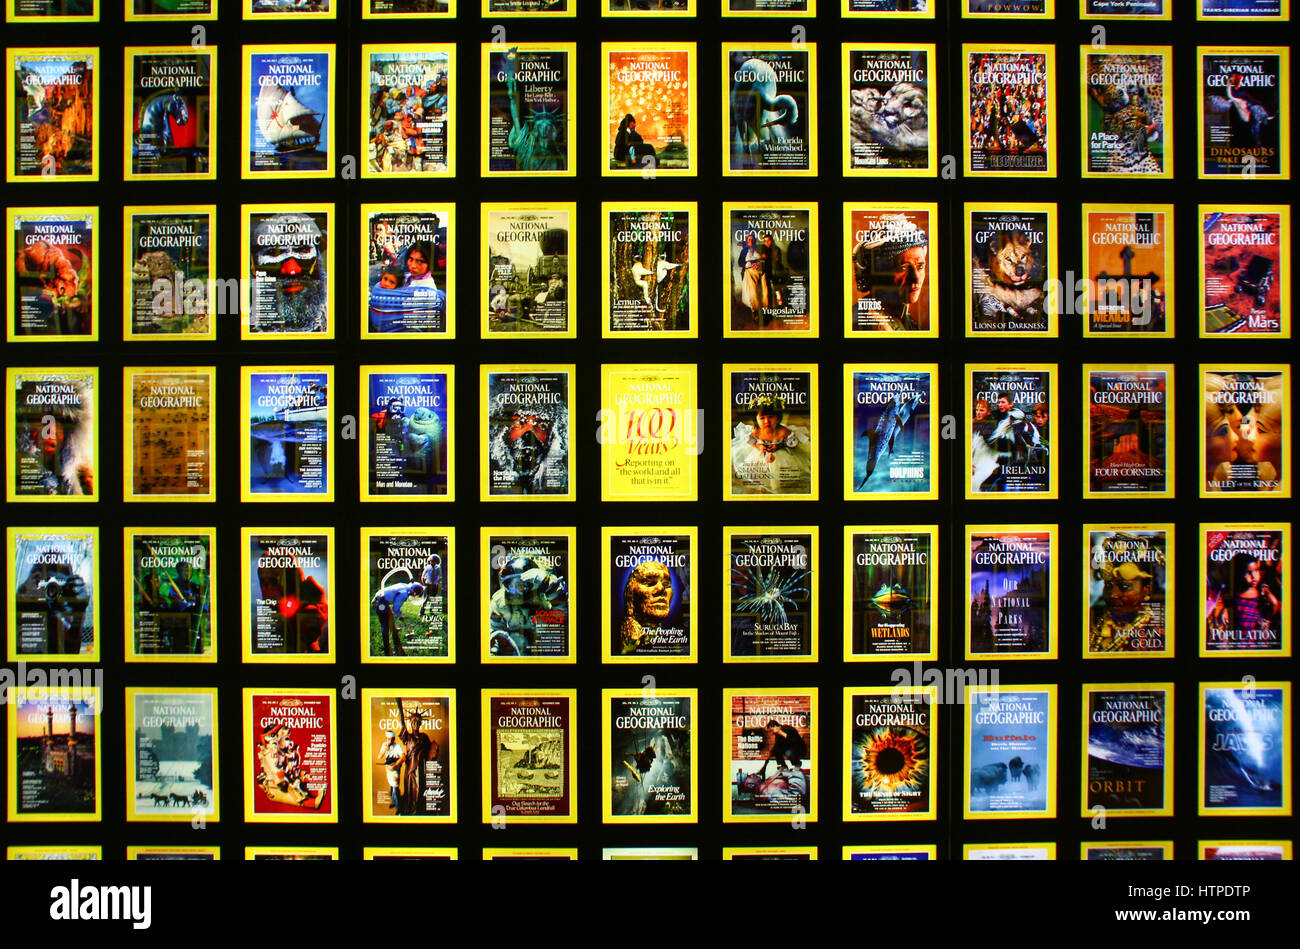 Washington DC, USA - April 29 2014: Collection of National Geographic magazine covers in National Geographic Museum. Stock Photo